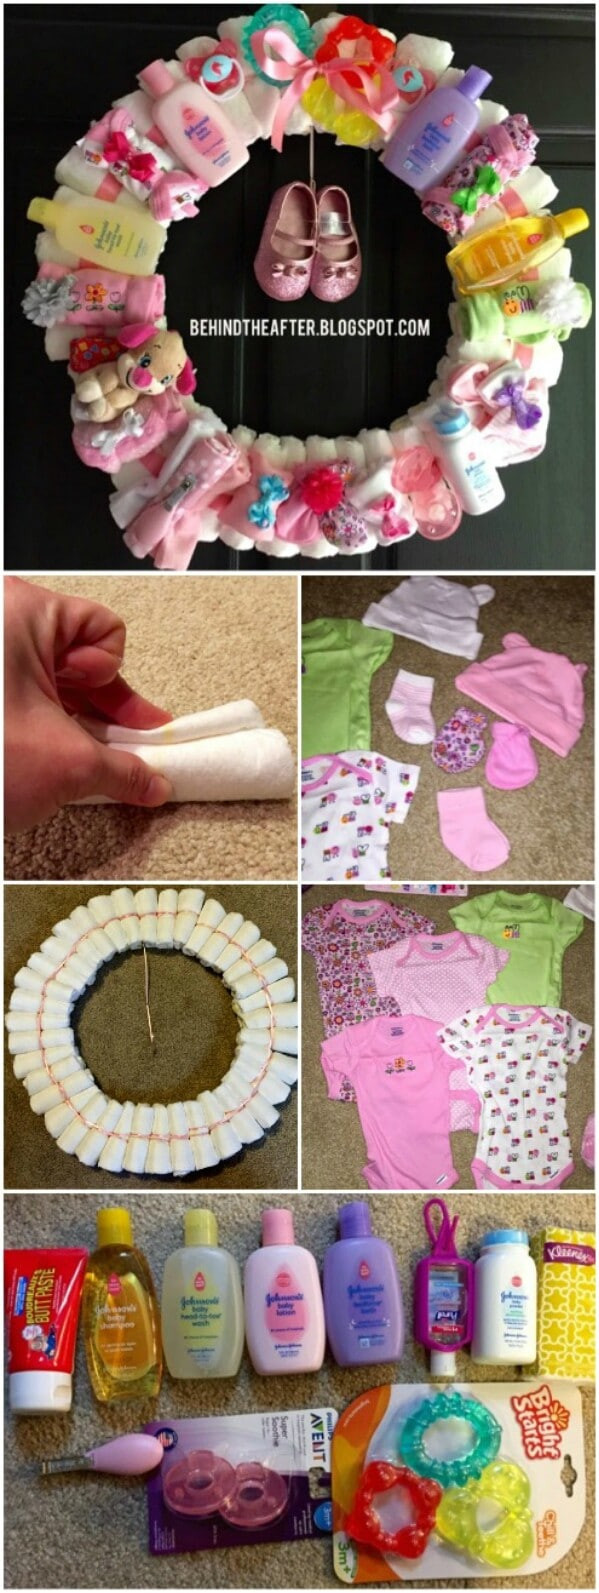 Baby Photo Gift Ideas
 25 Enchantingly Adorable Baby Shower Gift Ideas That Will